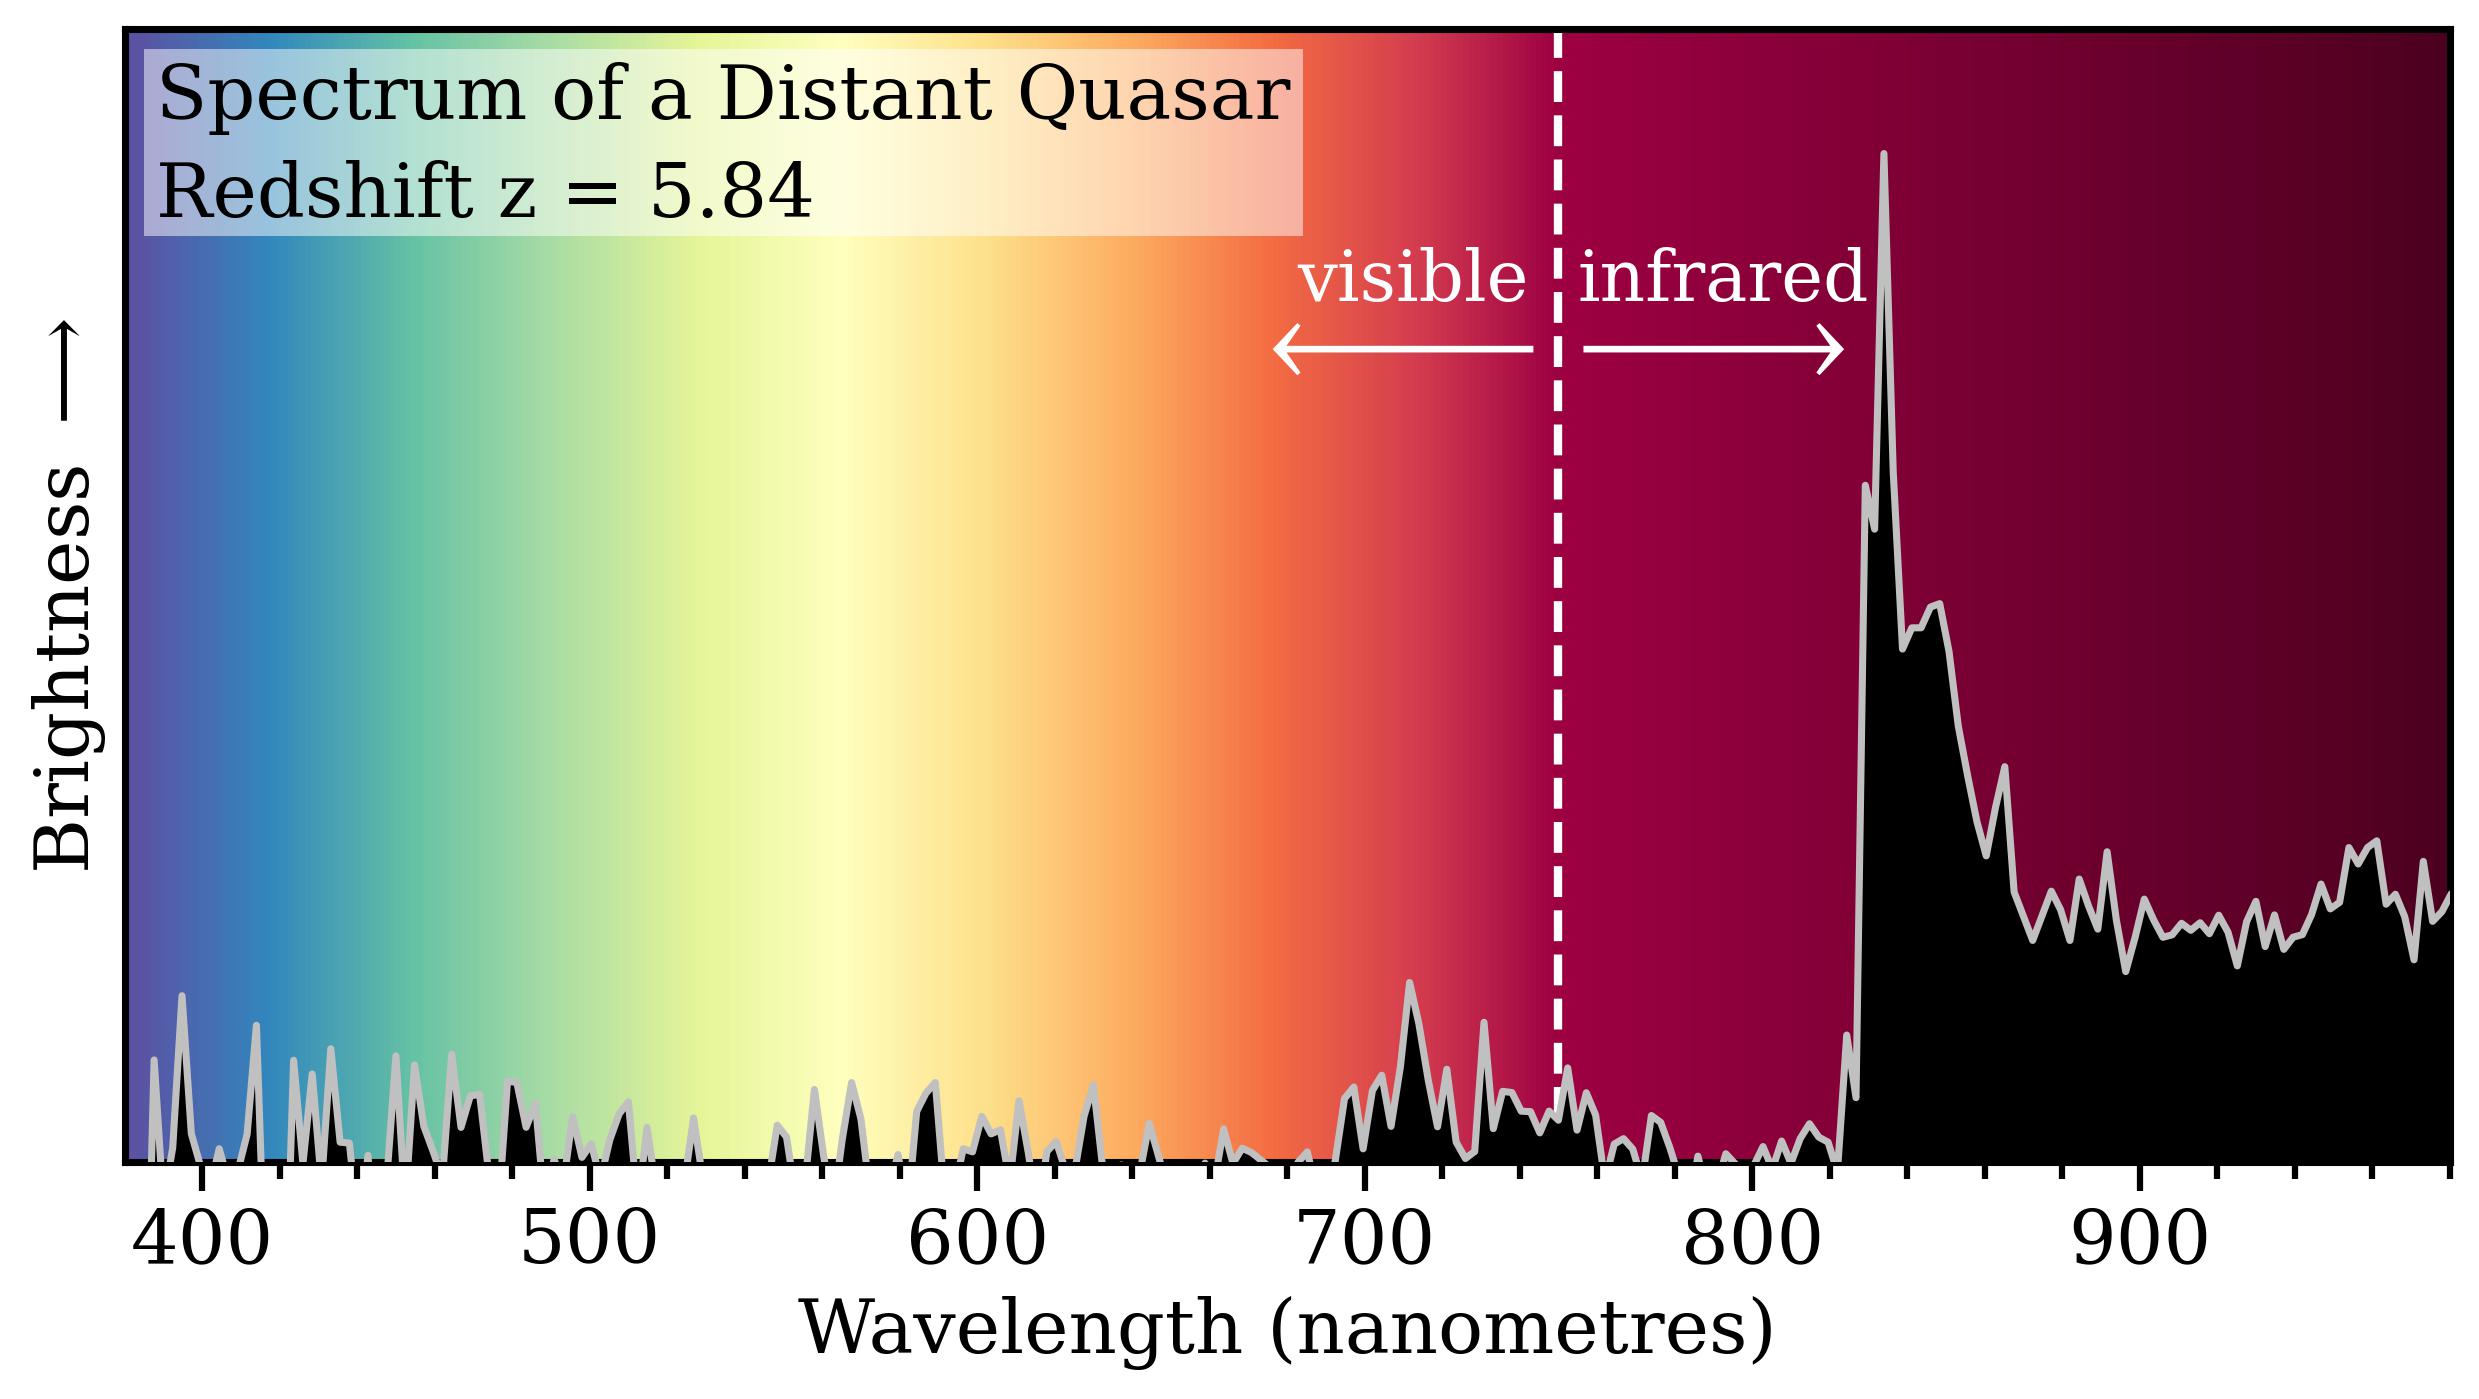 rainbow colored spectrum showing peaks in the invisible portion of the infrared spectrum.